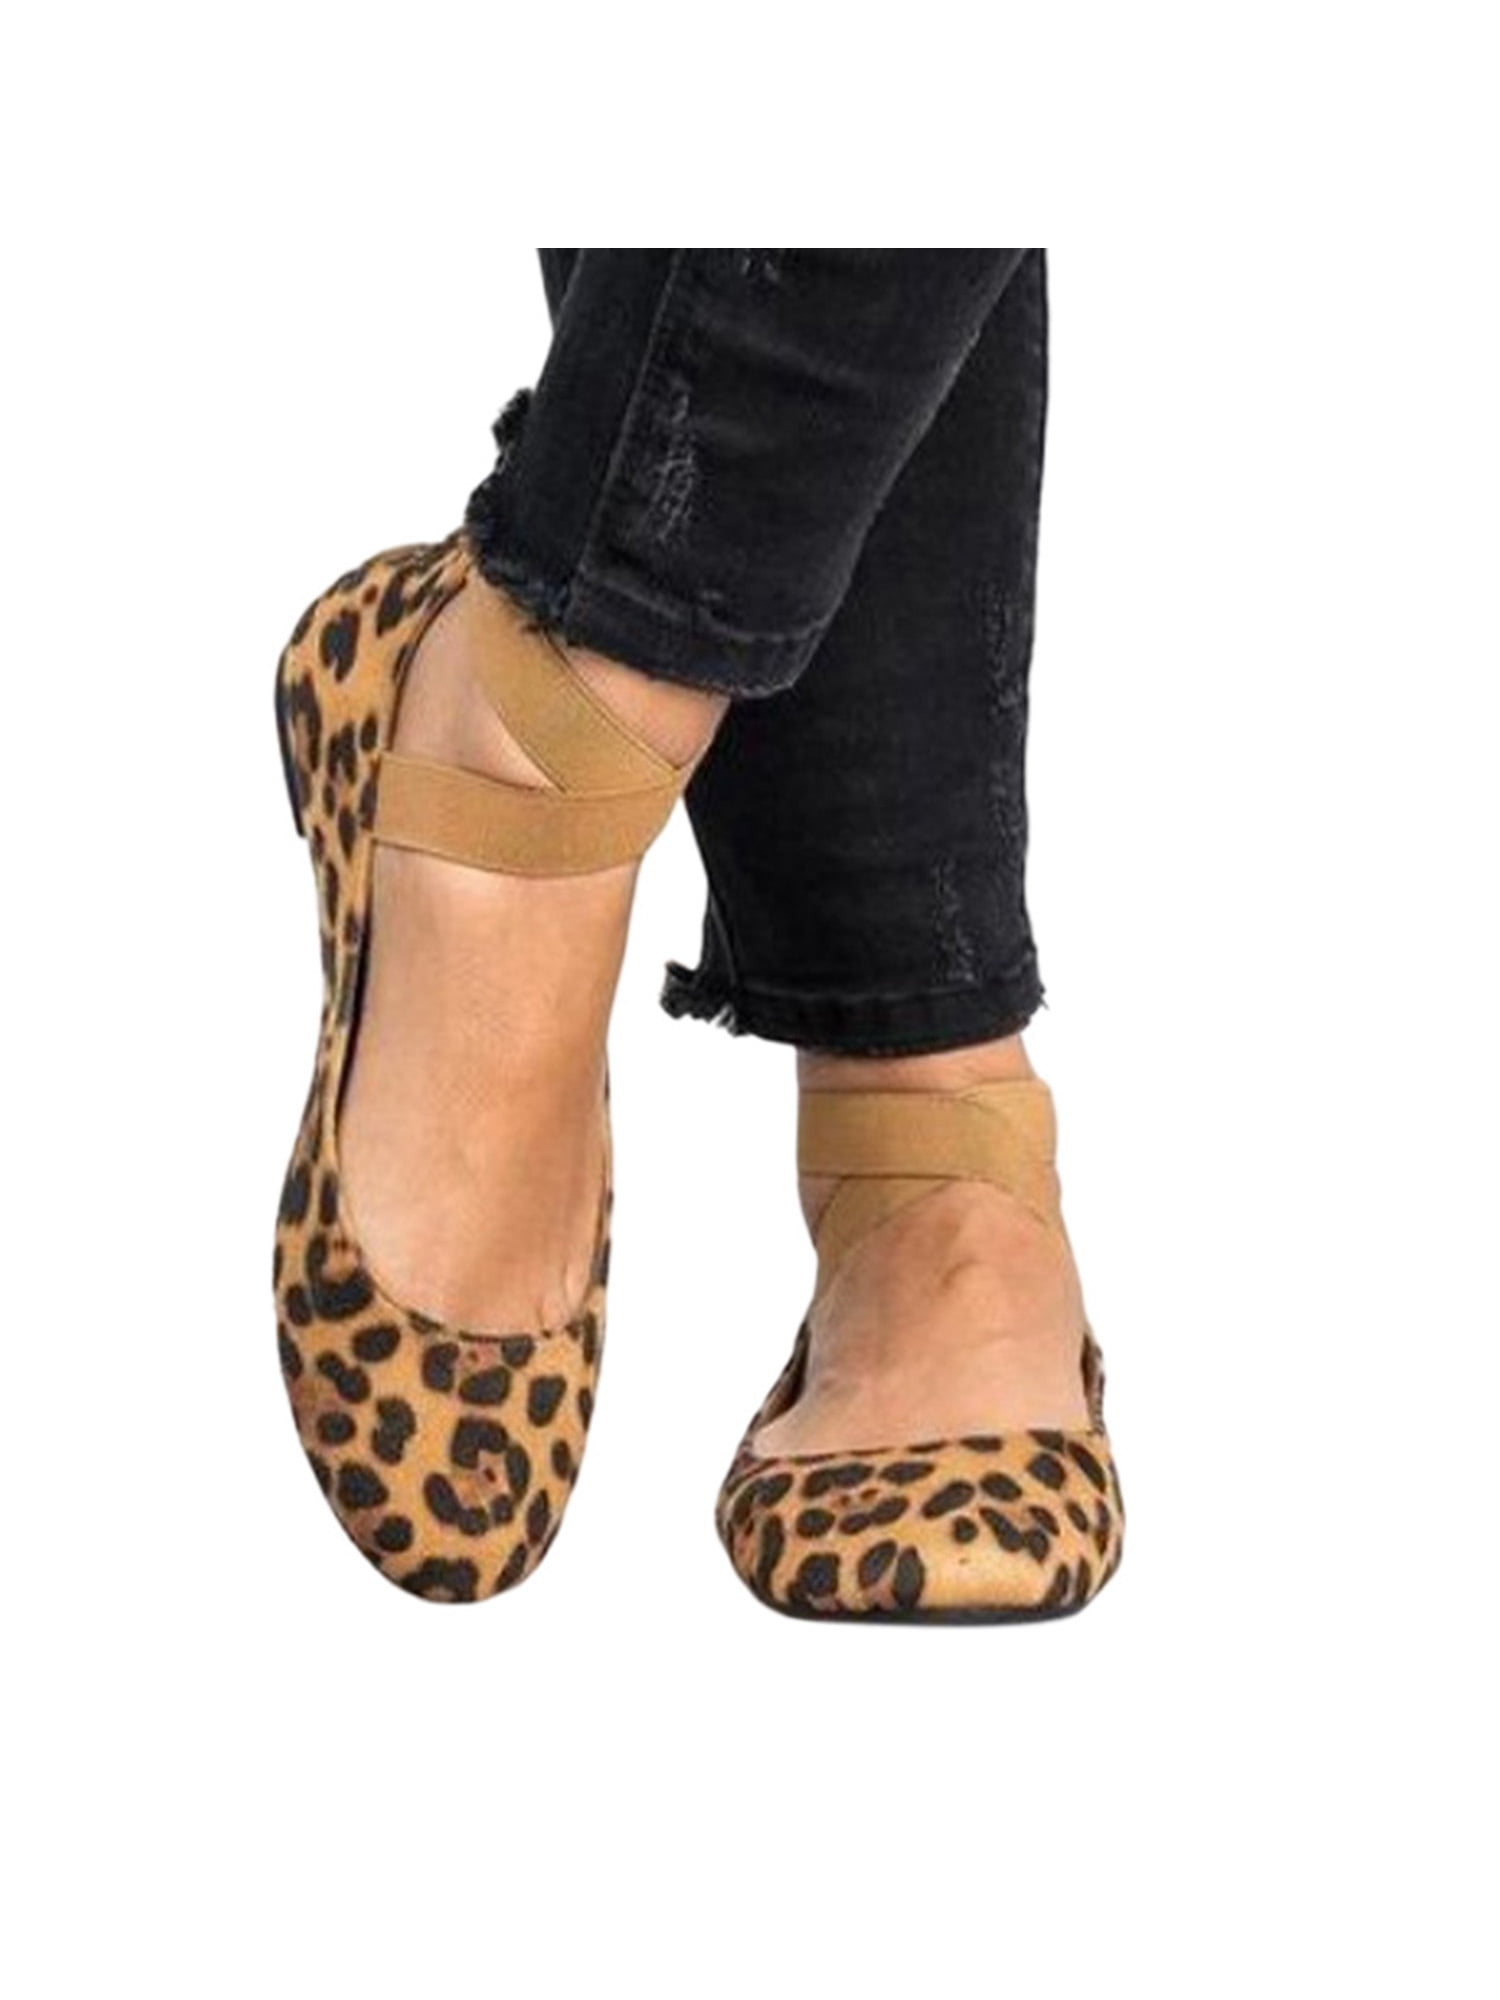 Leopard Skin Wild Cat Fur Womans Skateboard Casual Shoes Comfortable Classic Running Shoes 